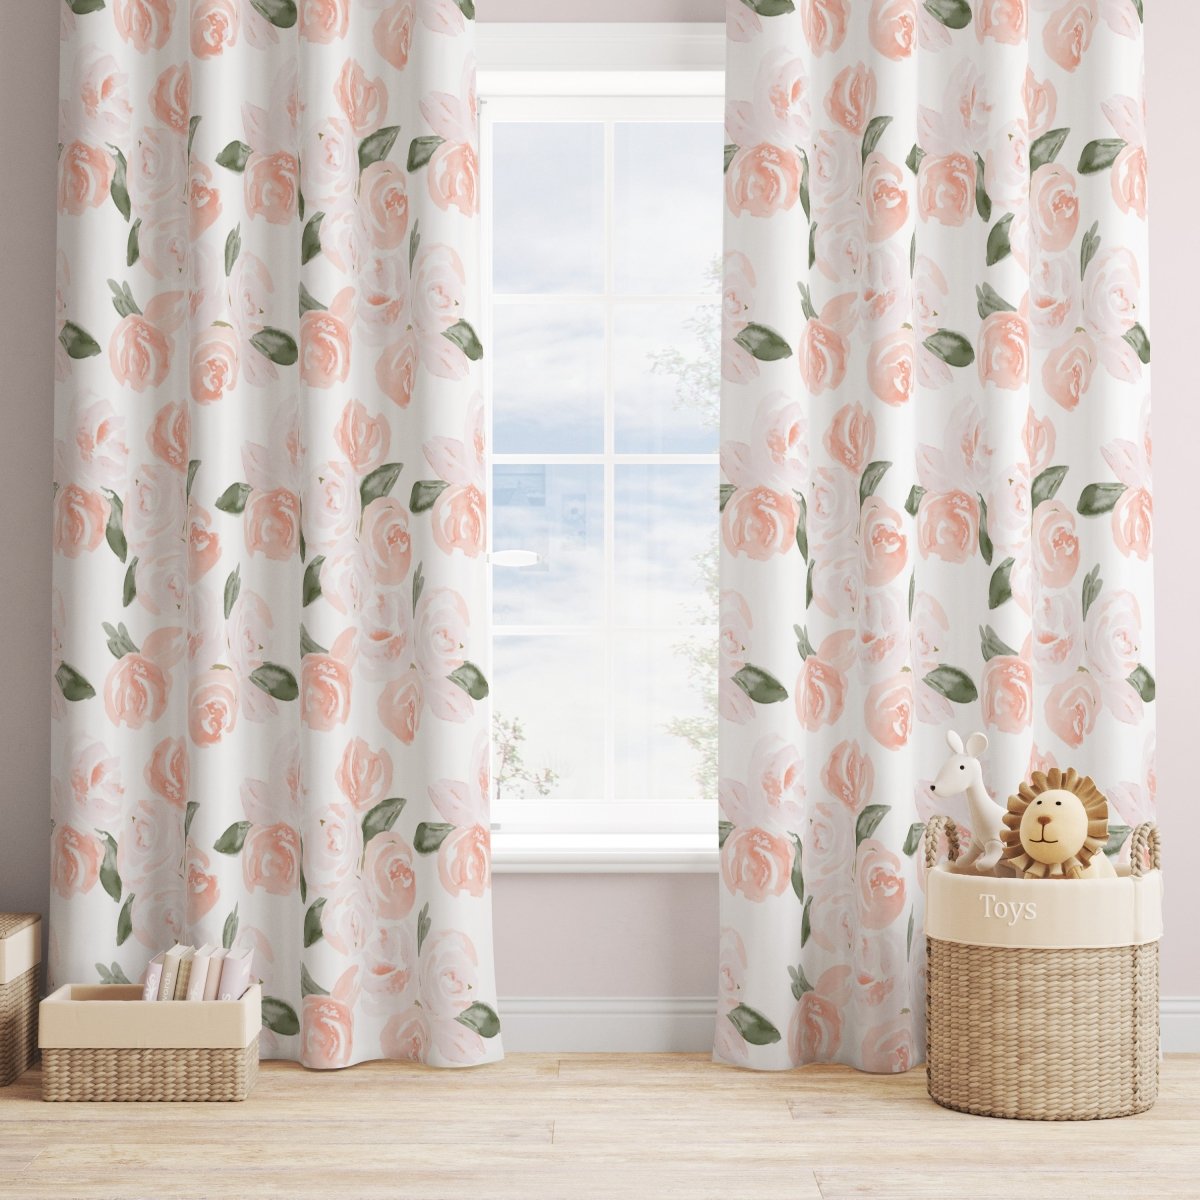 Watercolor Floral Curtain Panel - gender_girl, Theme_Floral,